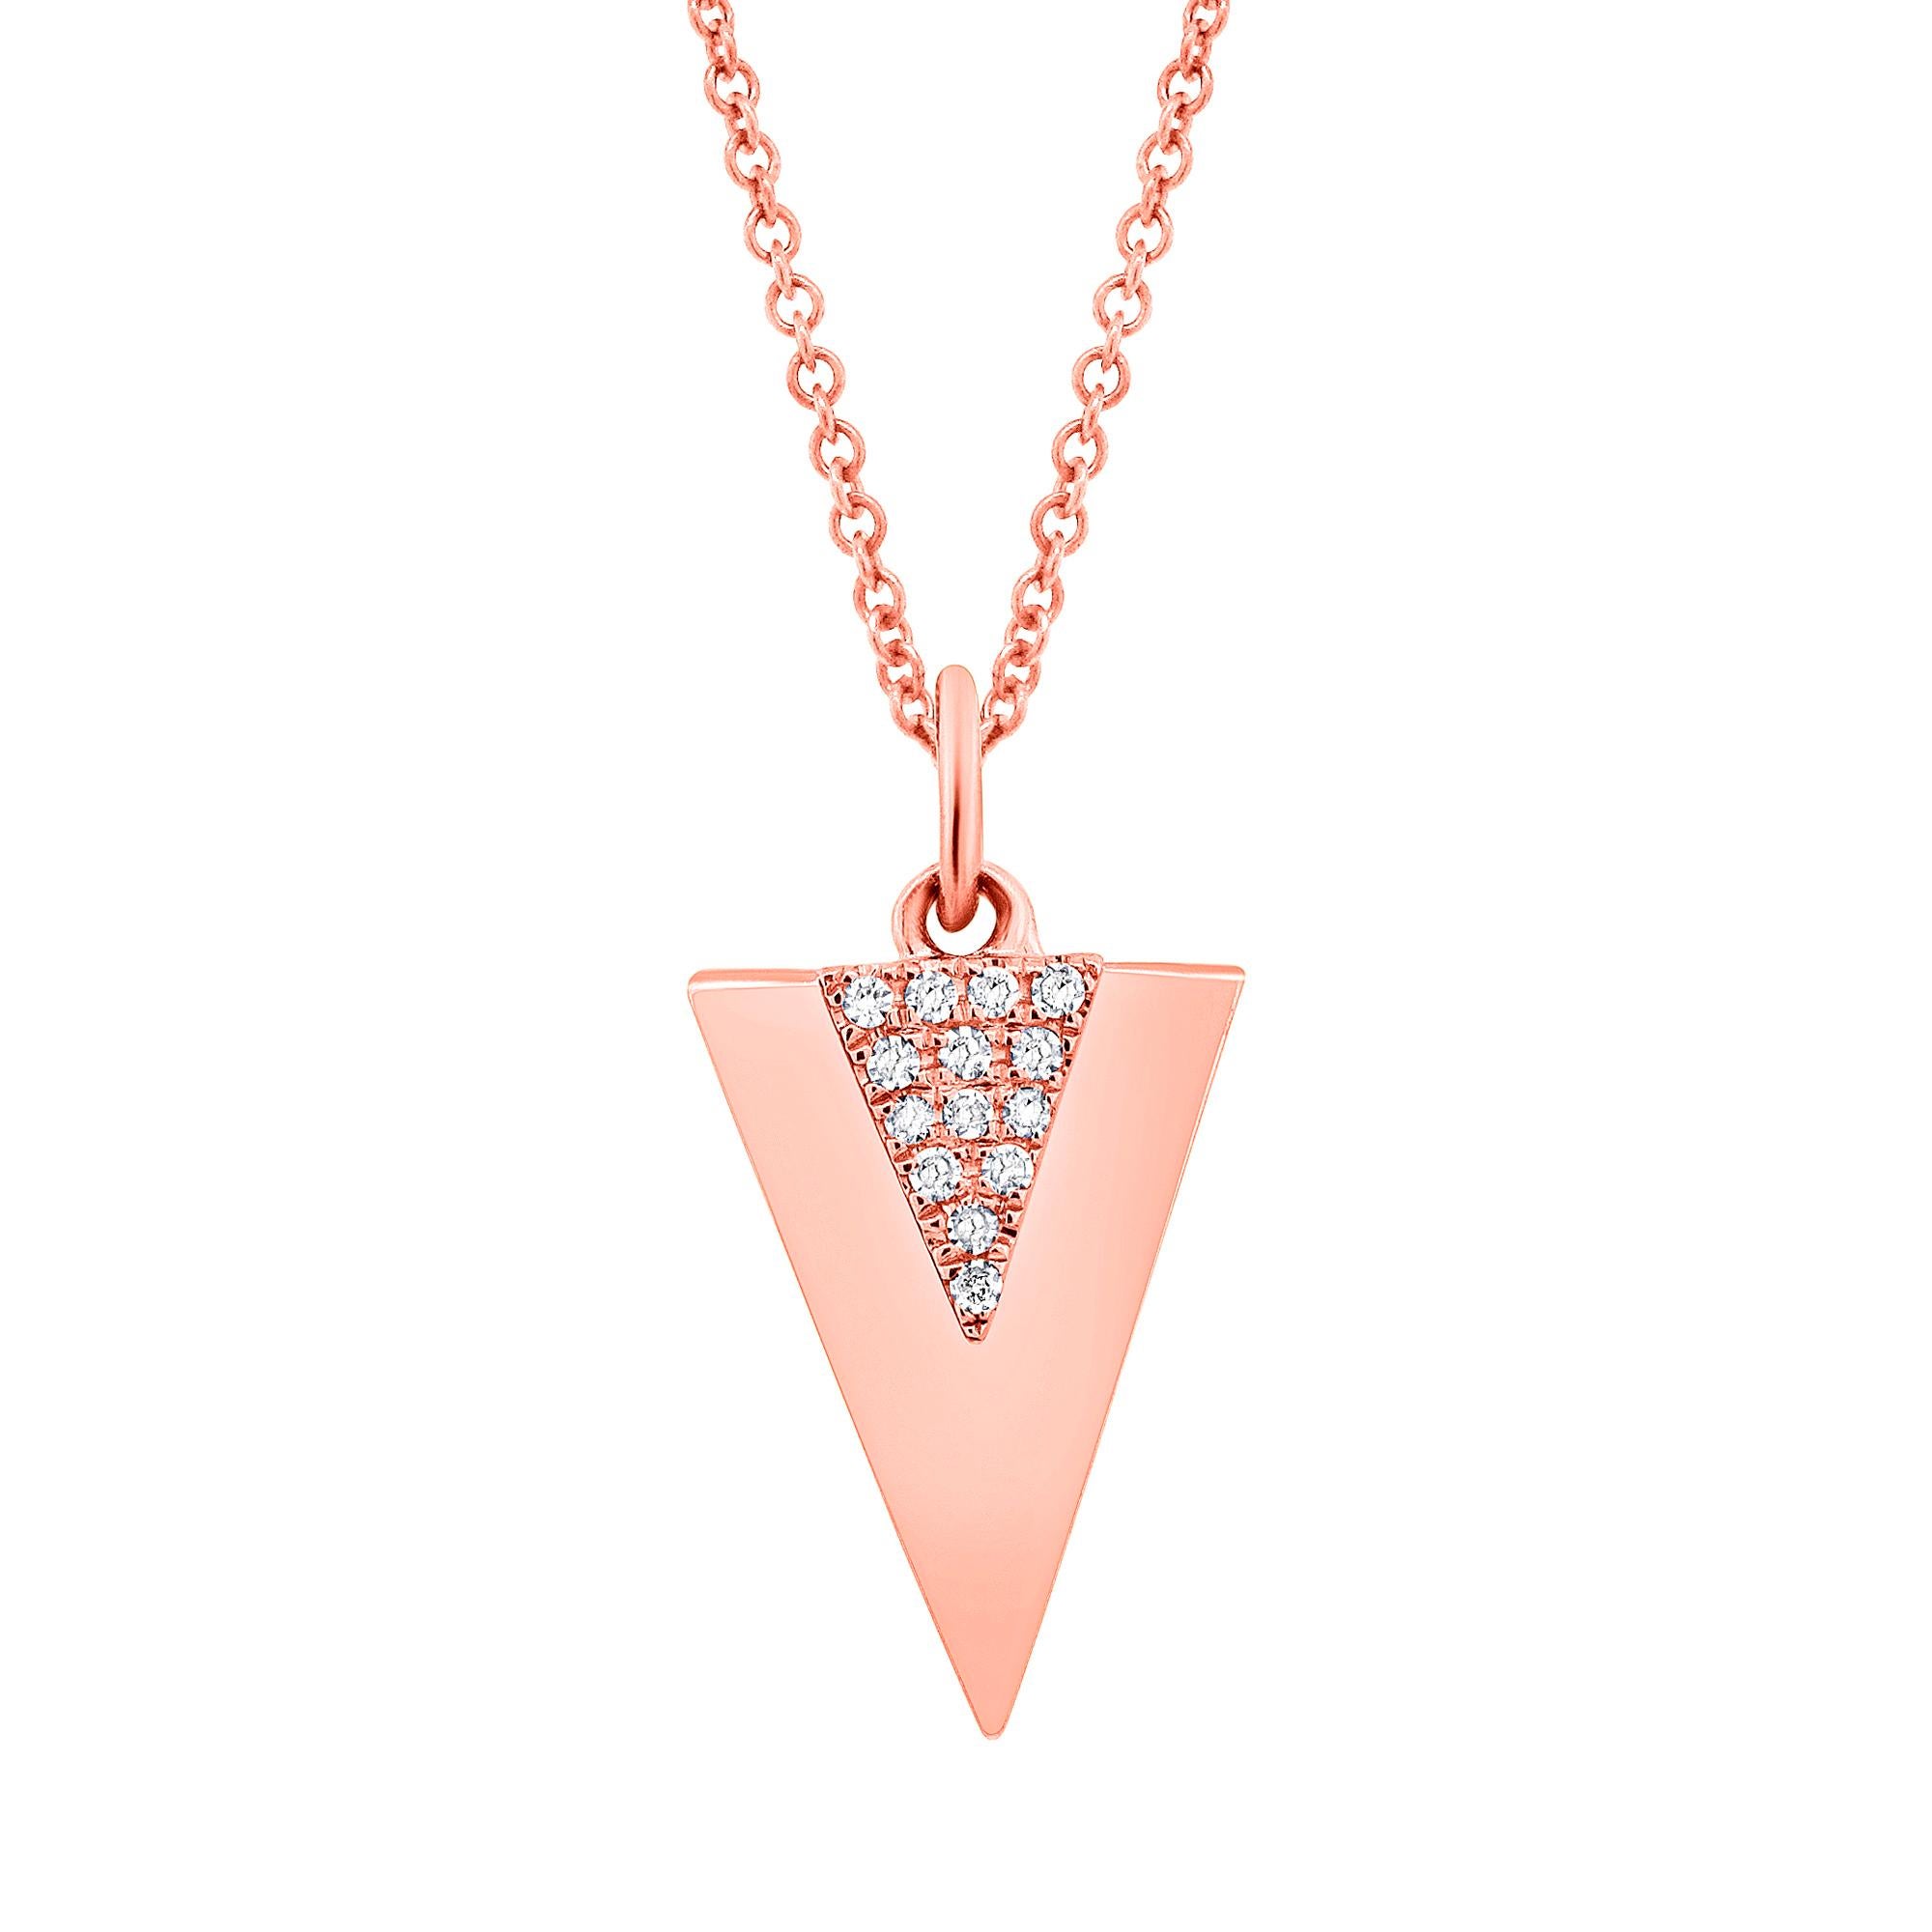 Beautiful and delicate this precious diamond necklace will leave everyone speechless the moment they see it. Crafted in high polished solid 14k rose gold this necklace is pave set with brilliant round cut diamonds of G-H color and clean VS clarity.